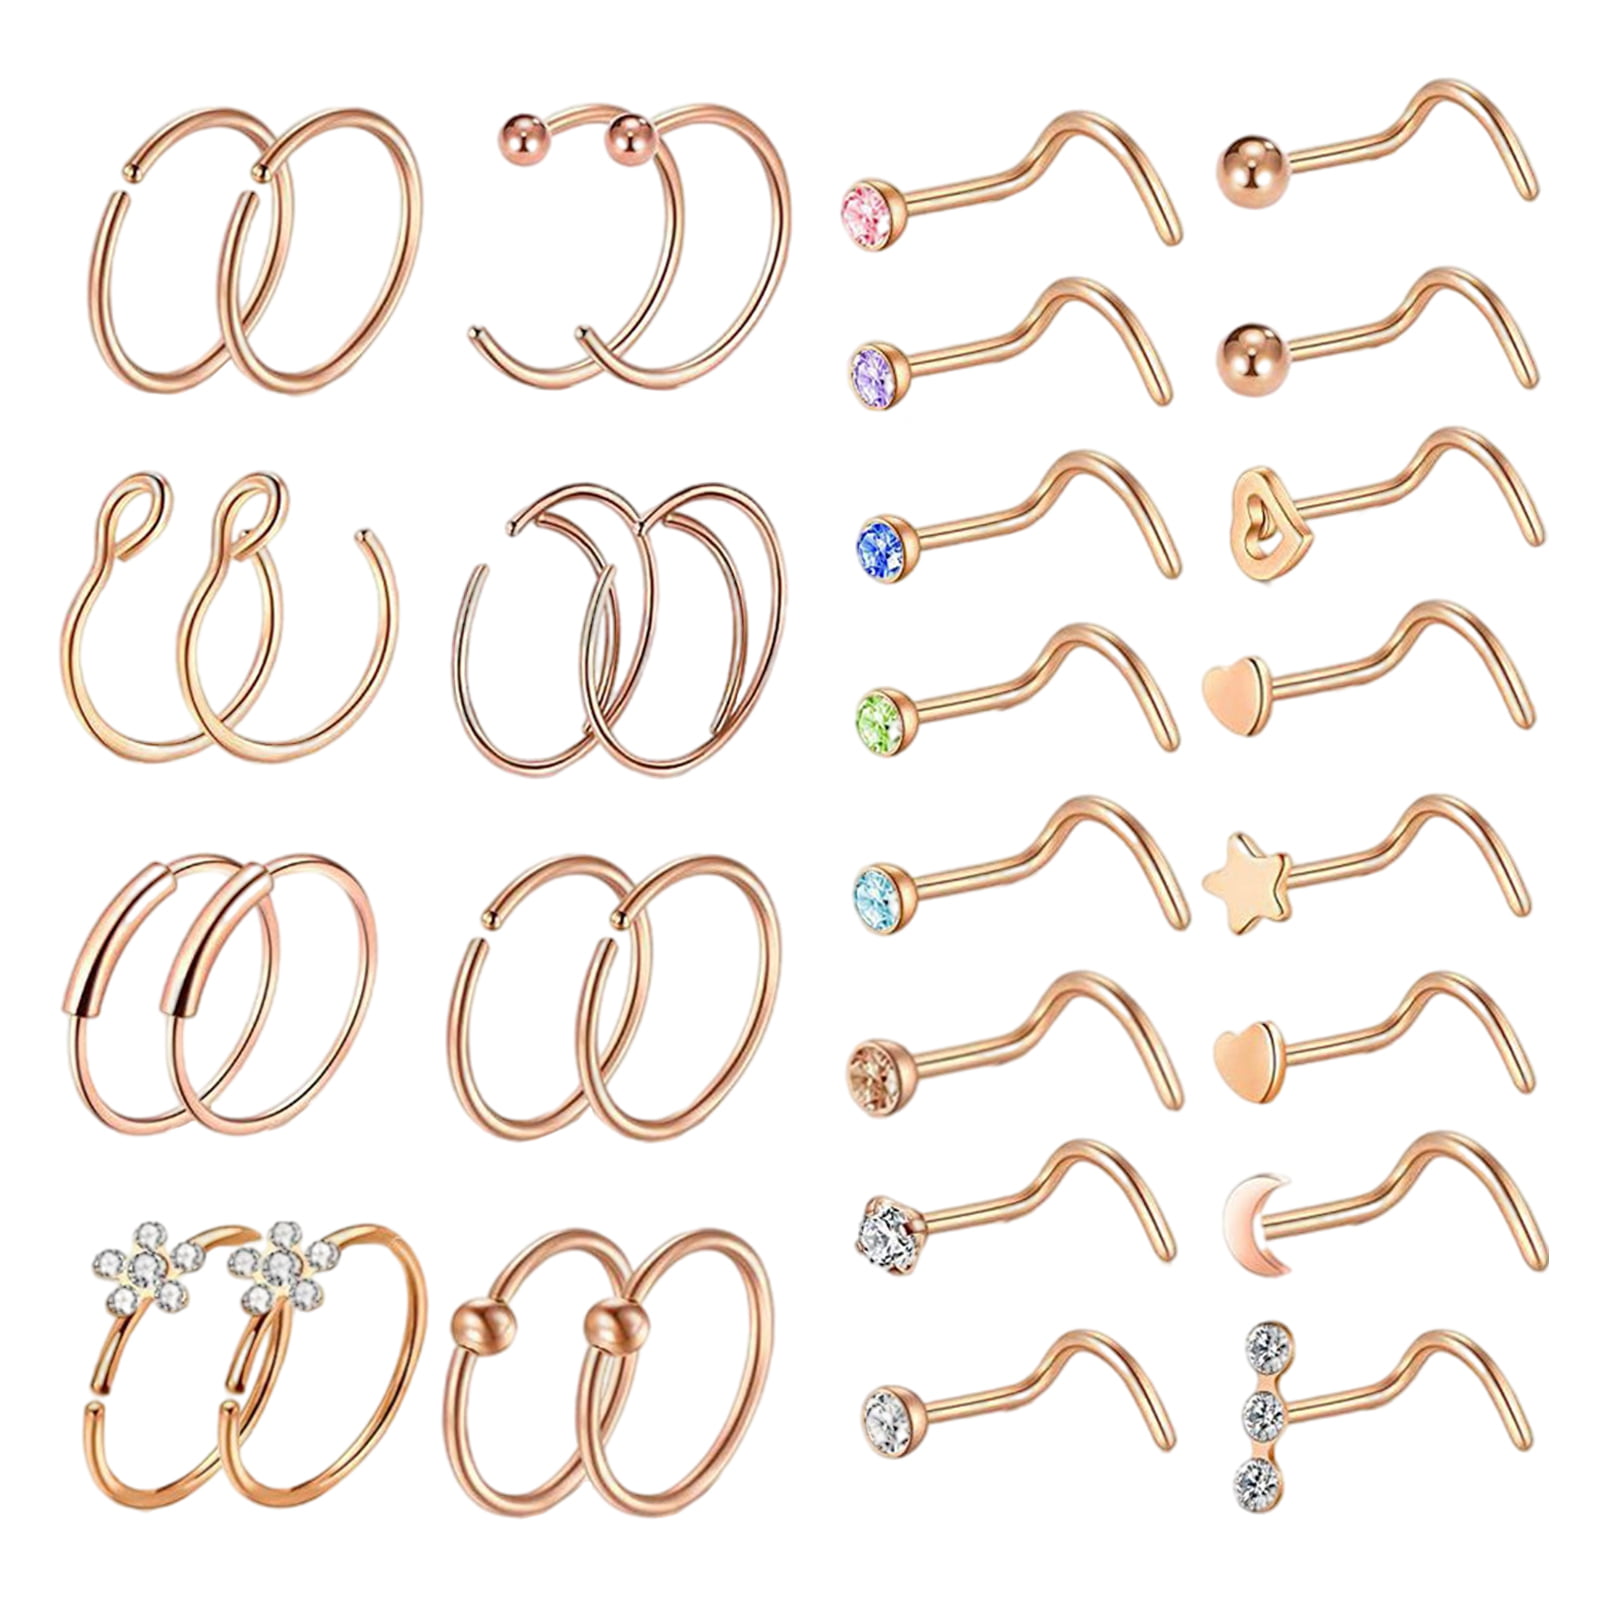 Briana Williams Surgical Stainless Steel 20G 8mm Nose Rings Hoop L Shaped Bone Screw Nose Rings Studs 32pcs Nose Piercing Jewelry Set 